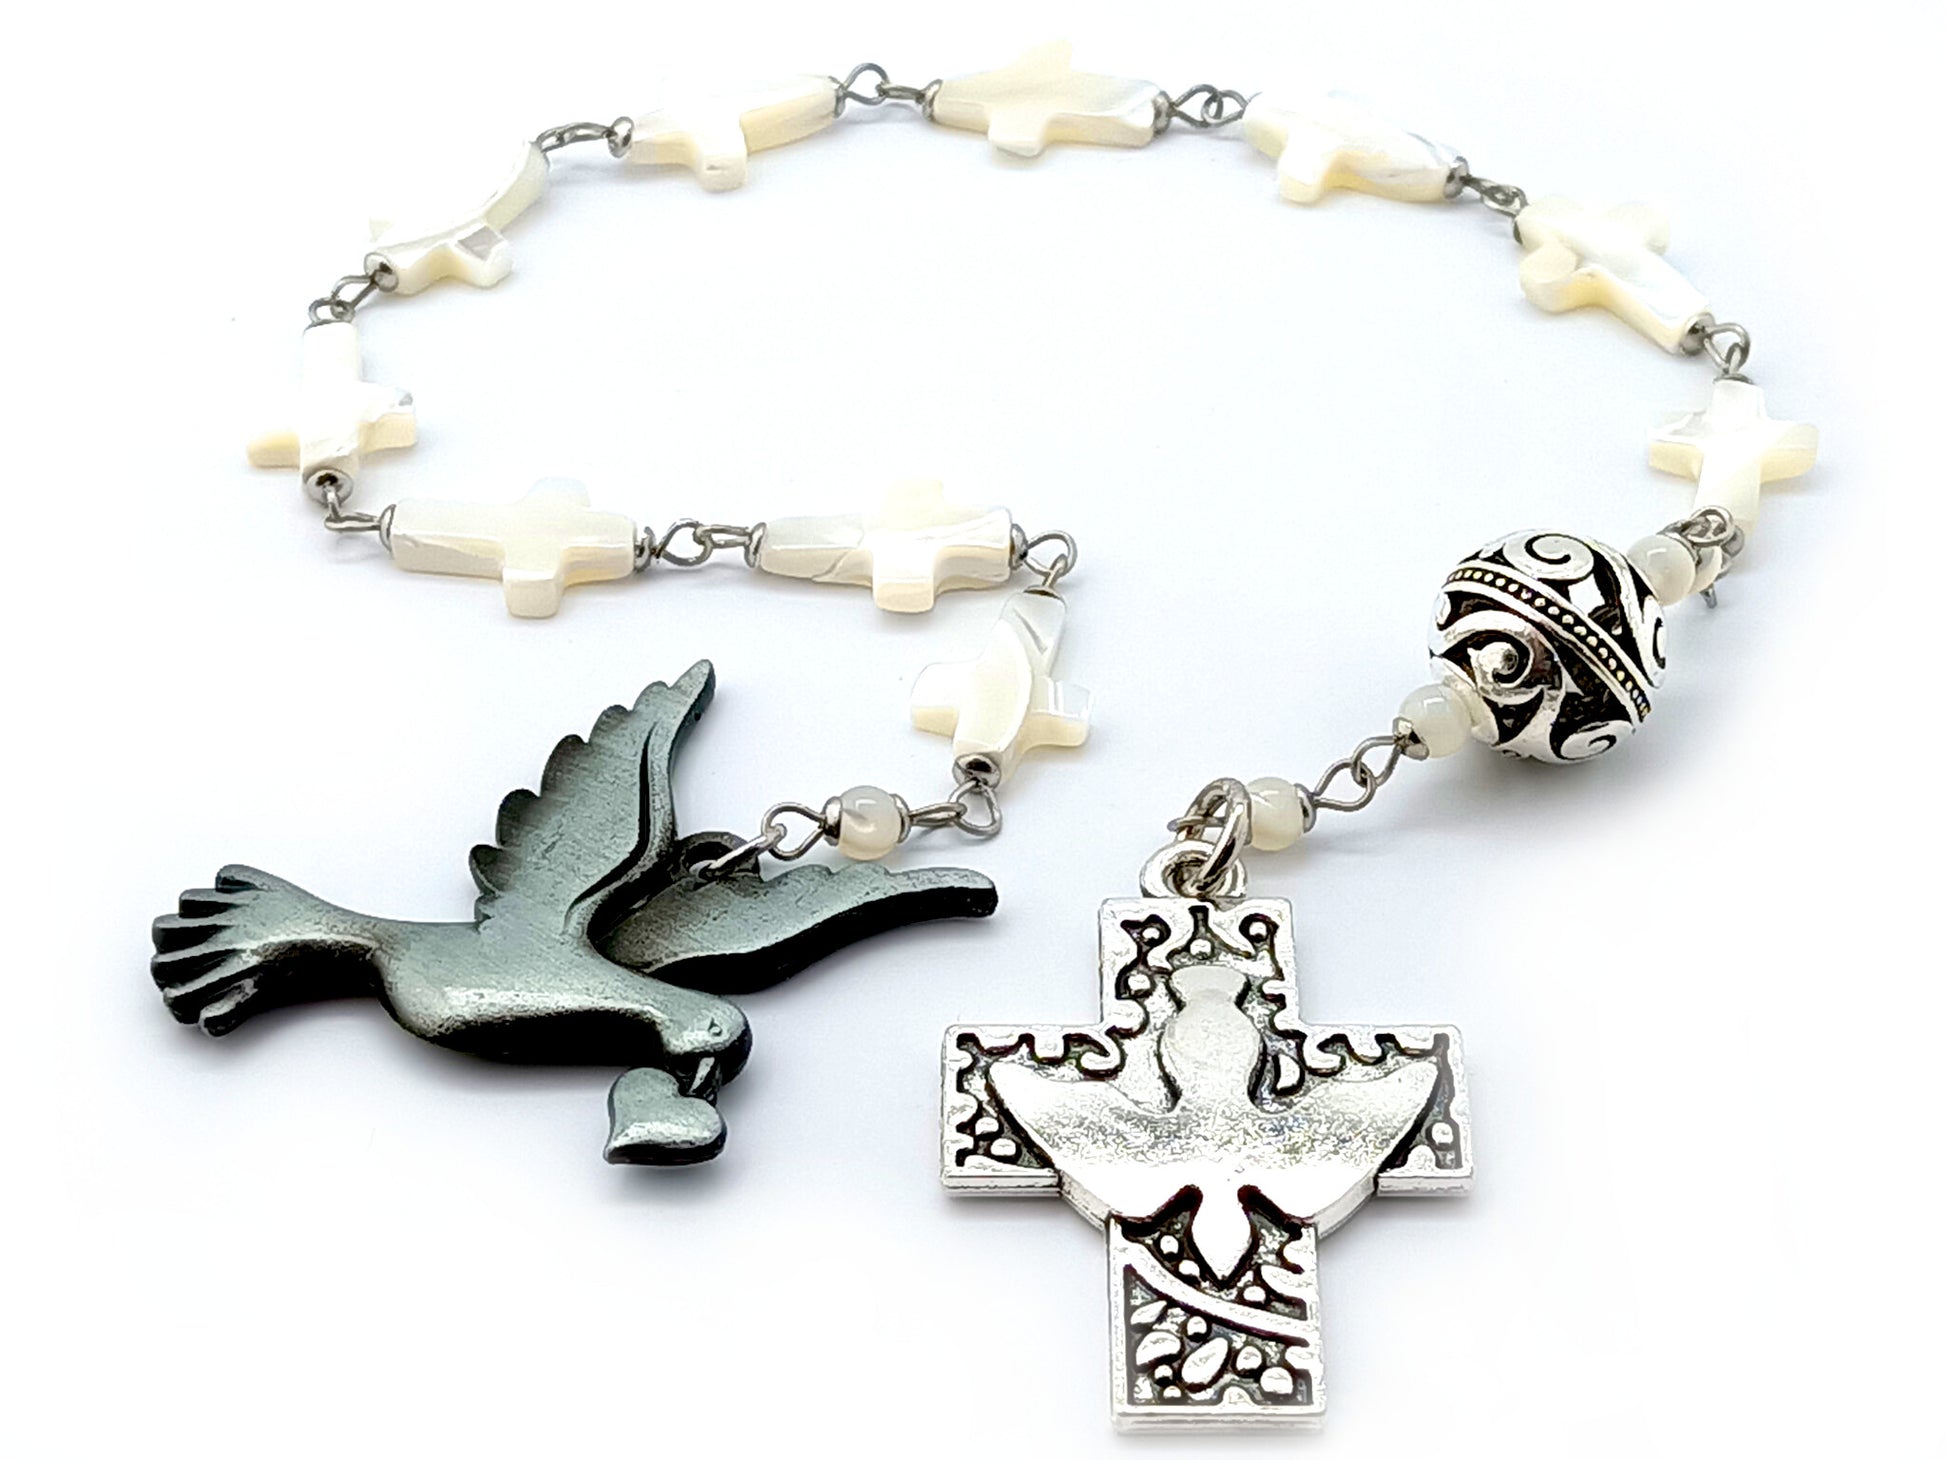 Holy Spirit unique rosary beads single decade with mother of pearl cross beads, silver Pater bead, dove cross and dove medal.